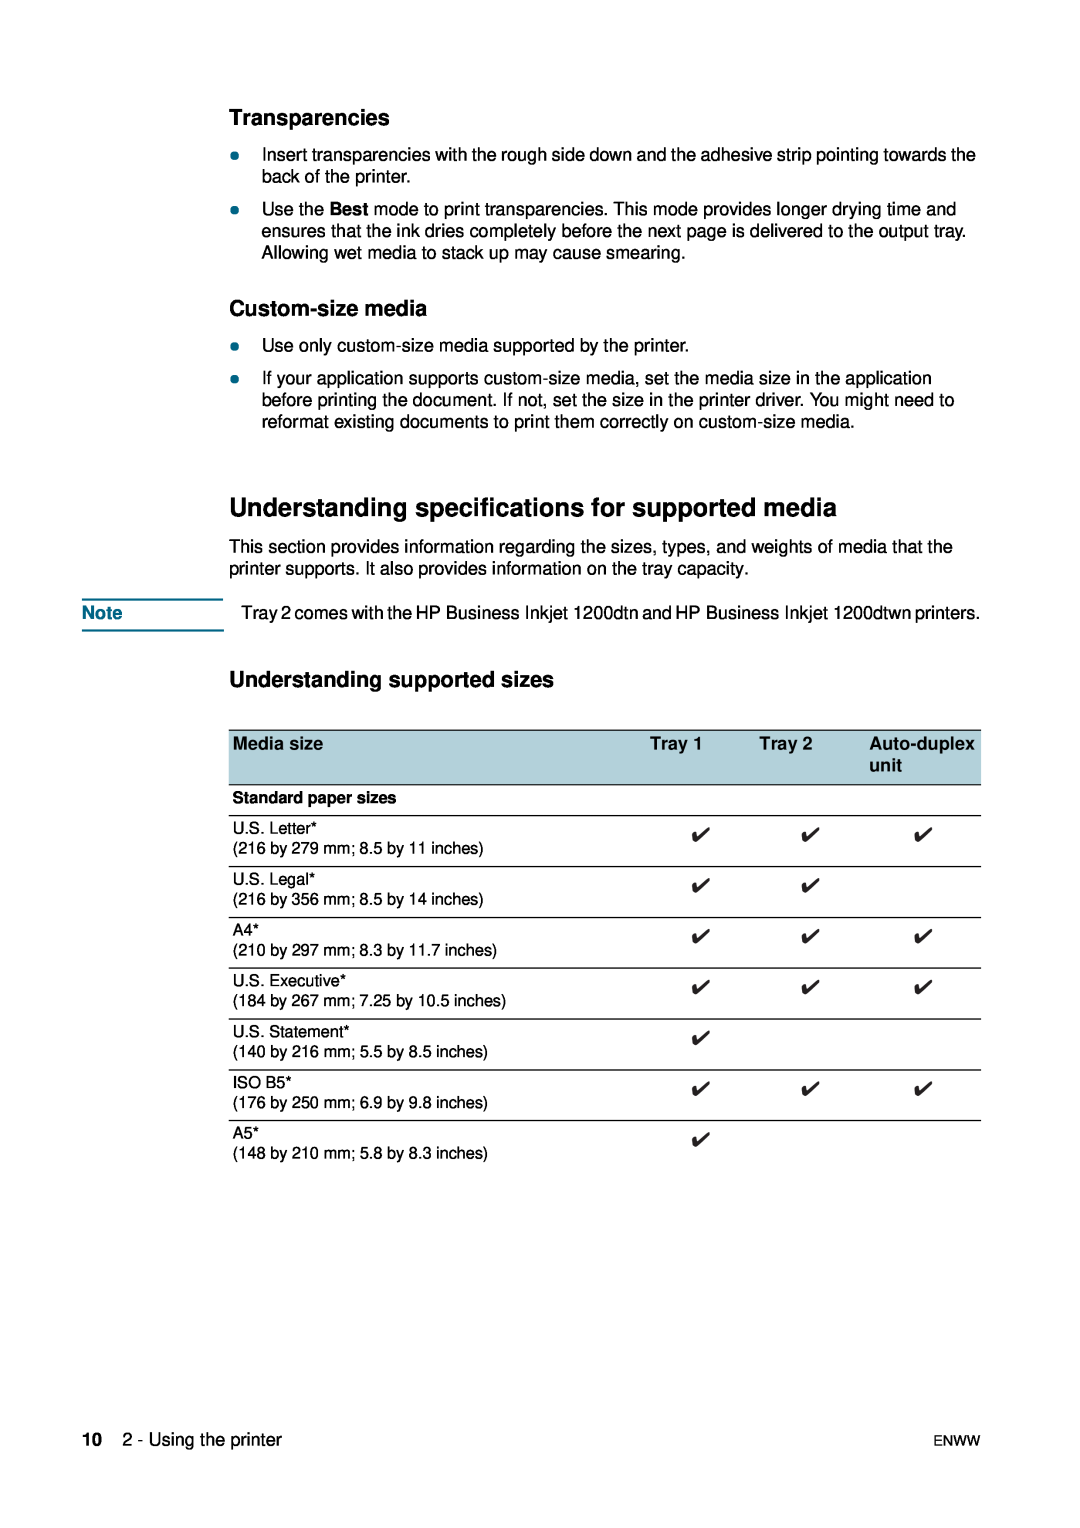 HP 1200 Understanding specifications for supported media, Transparencies, Custom-size media, Understanding supported sizes 